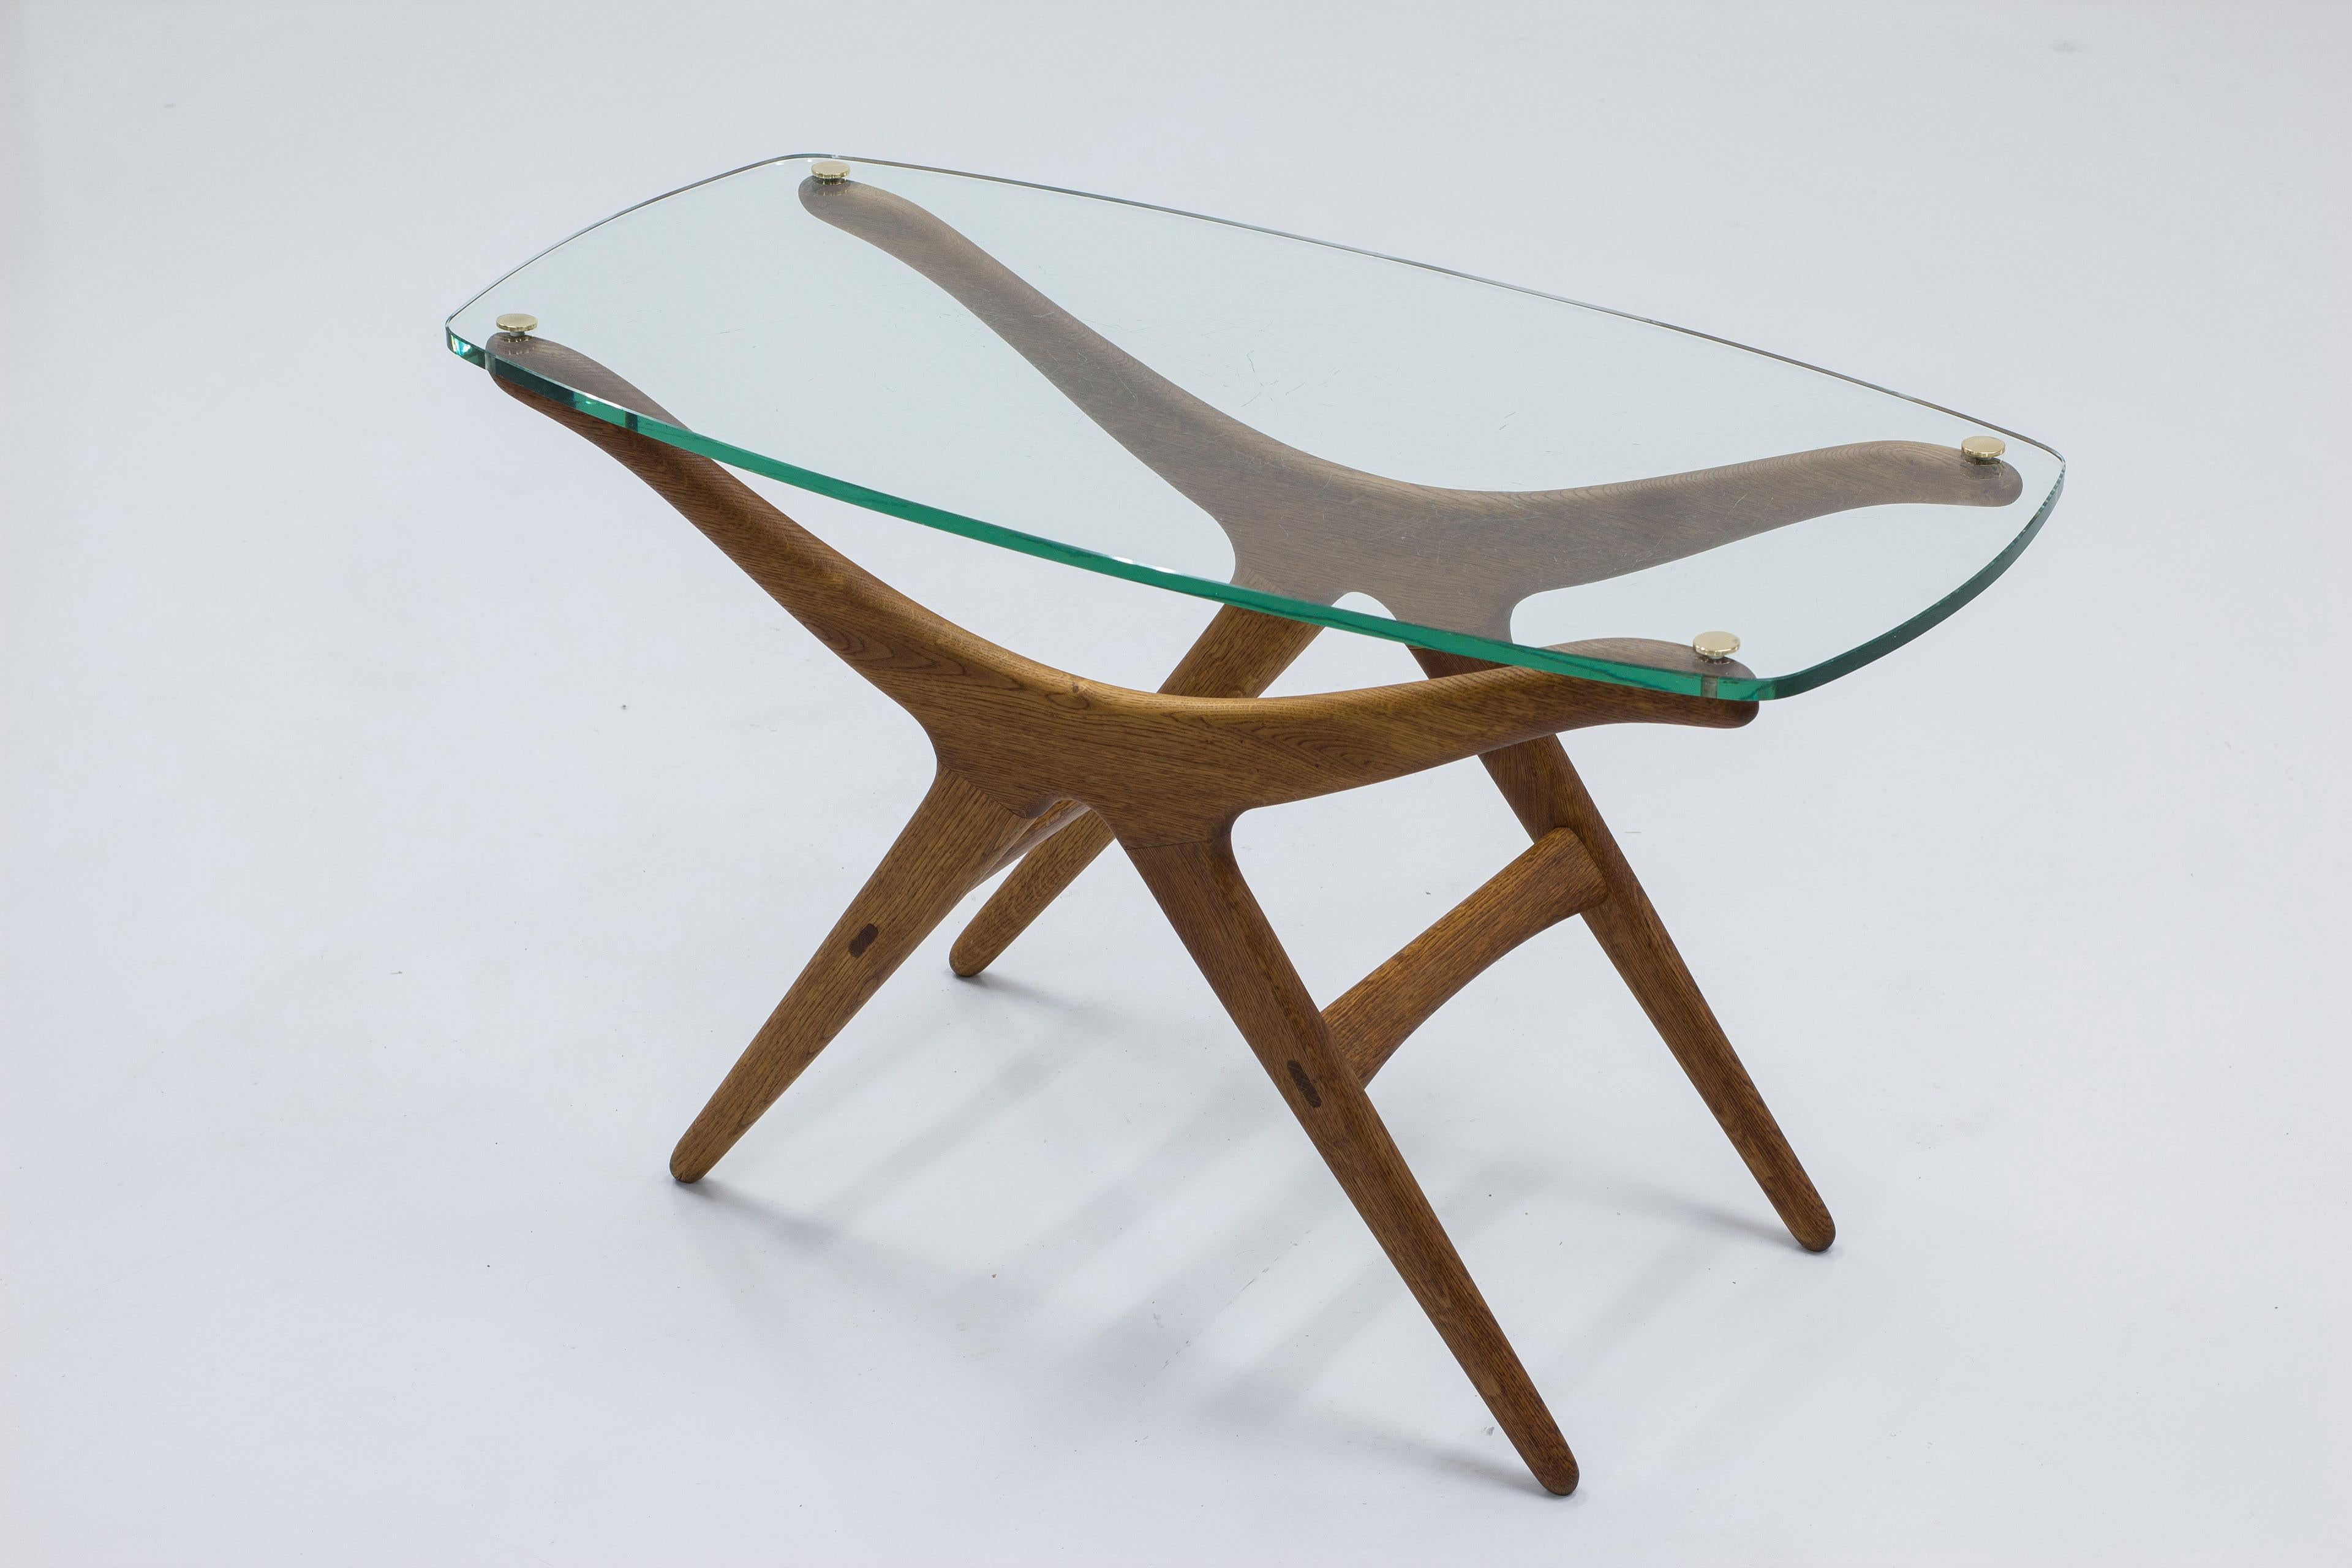 Very rare table designed by H. Brockman Petersen. Produced by cabinetmaker Louis G. Thiersen & Søn in 1953. The table was exhibited at the Cabinetmakers guild exhibition in 1953. The table was likely never put into production post the exhibition.